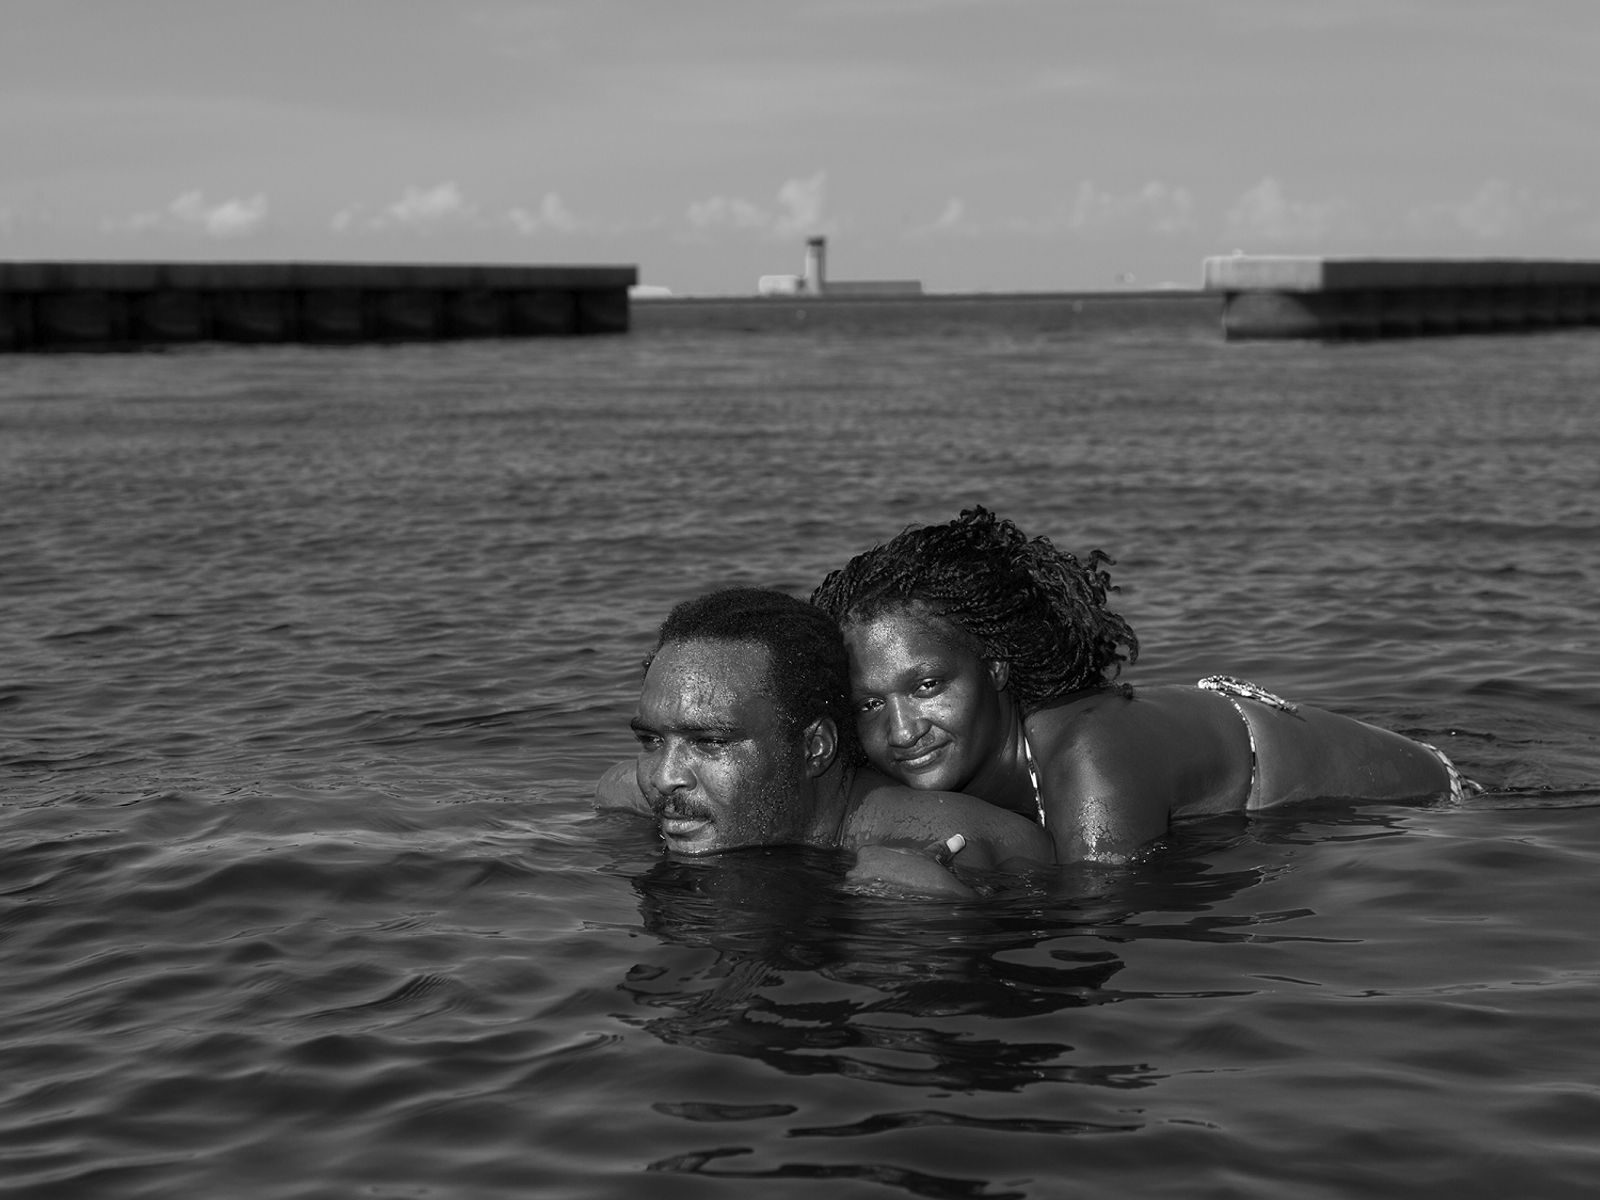 City of Water by Alec Soth, for The New Yorker